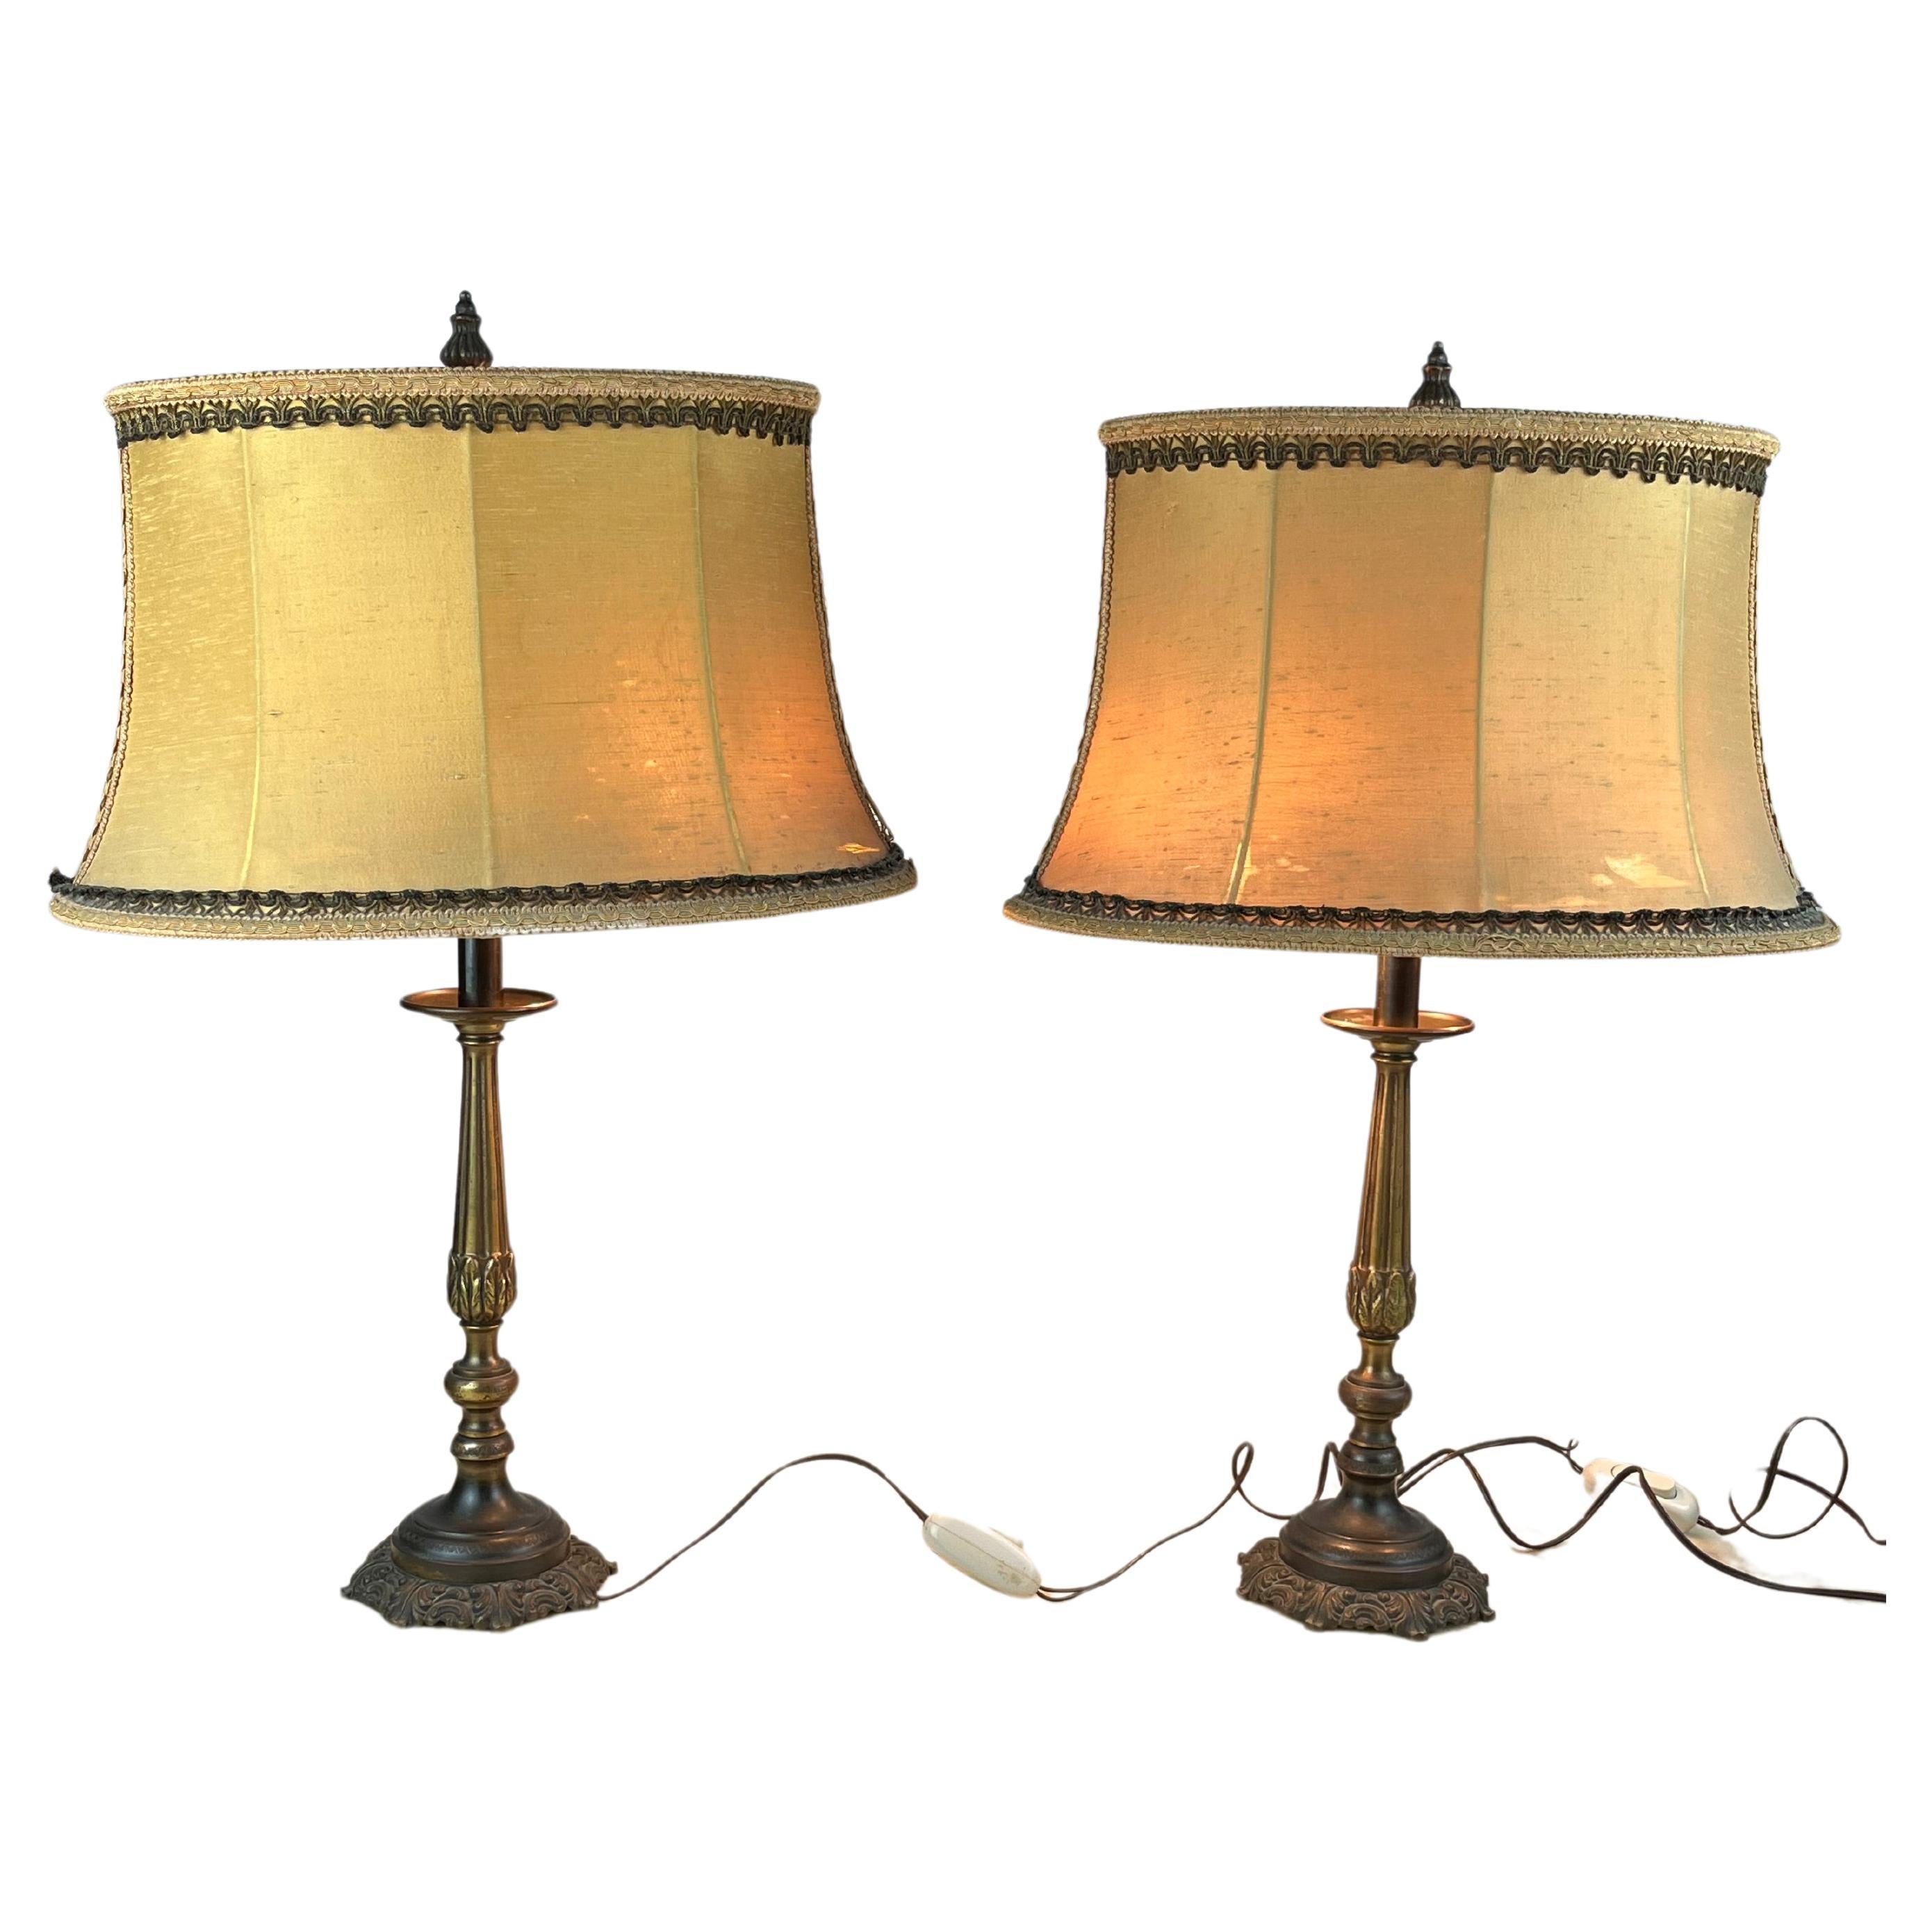 Pair of bronze table/bedside lamps, Italy, 1940s
The lamps are in good condition, the lampshades should be replaced.
They work with lamps and 27.
​